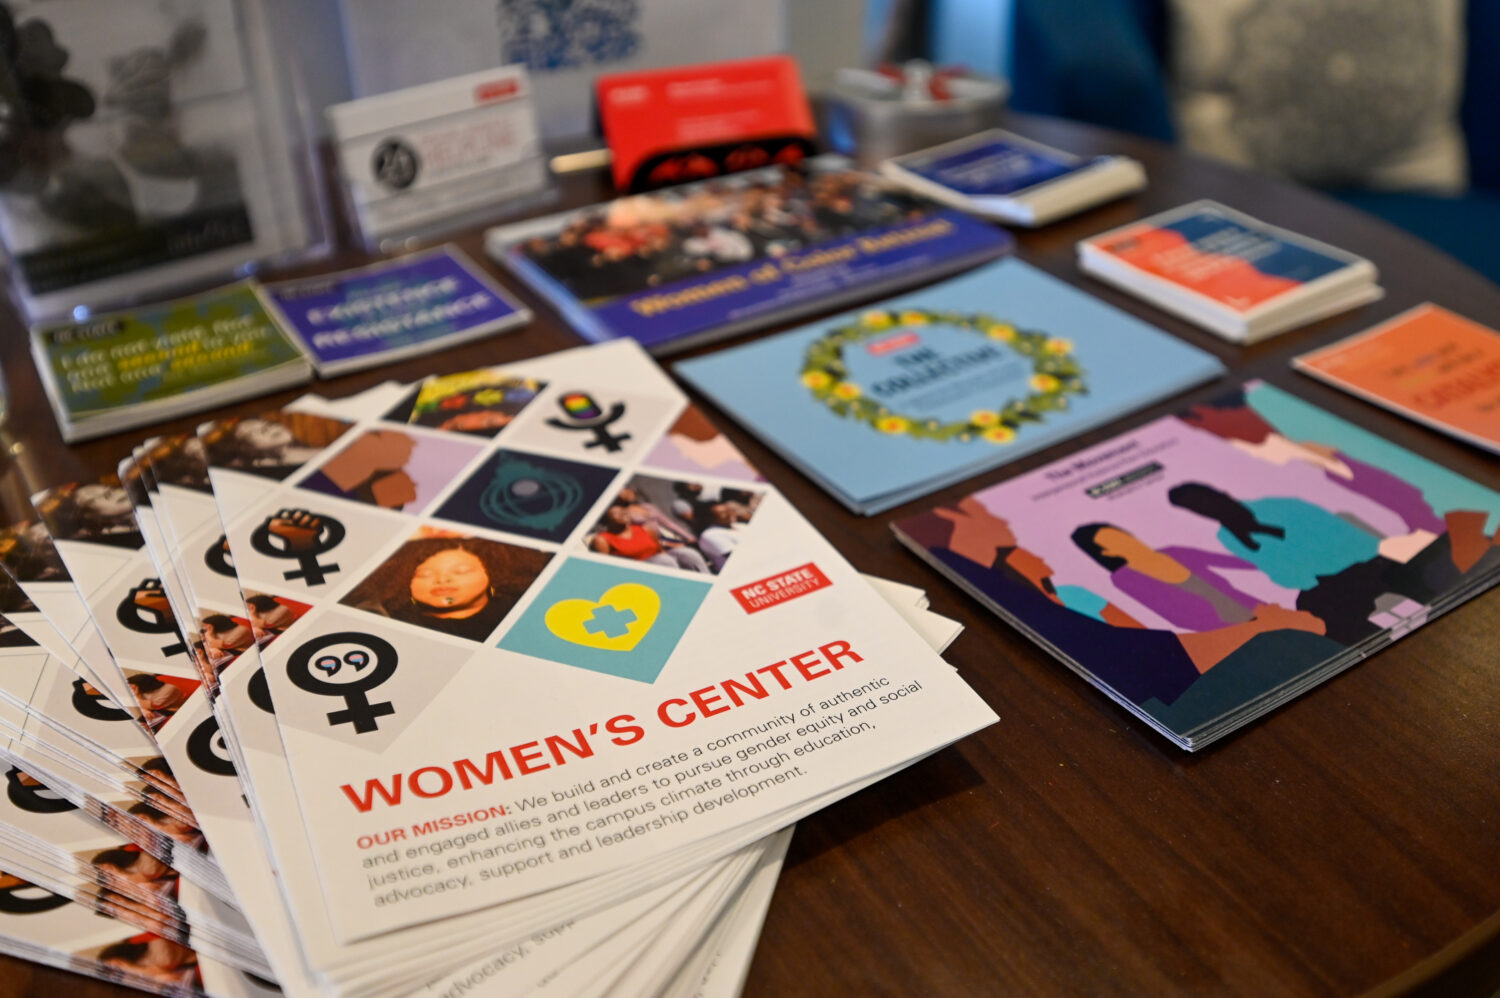 Women's Center brochures, postcards, and stickers on a table